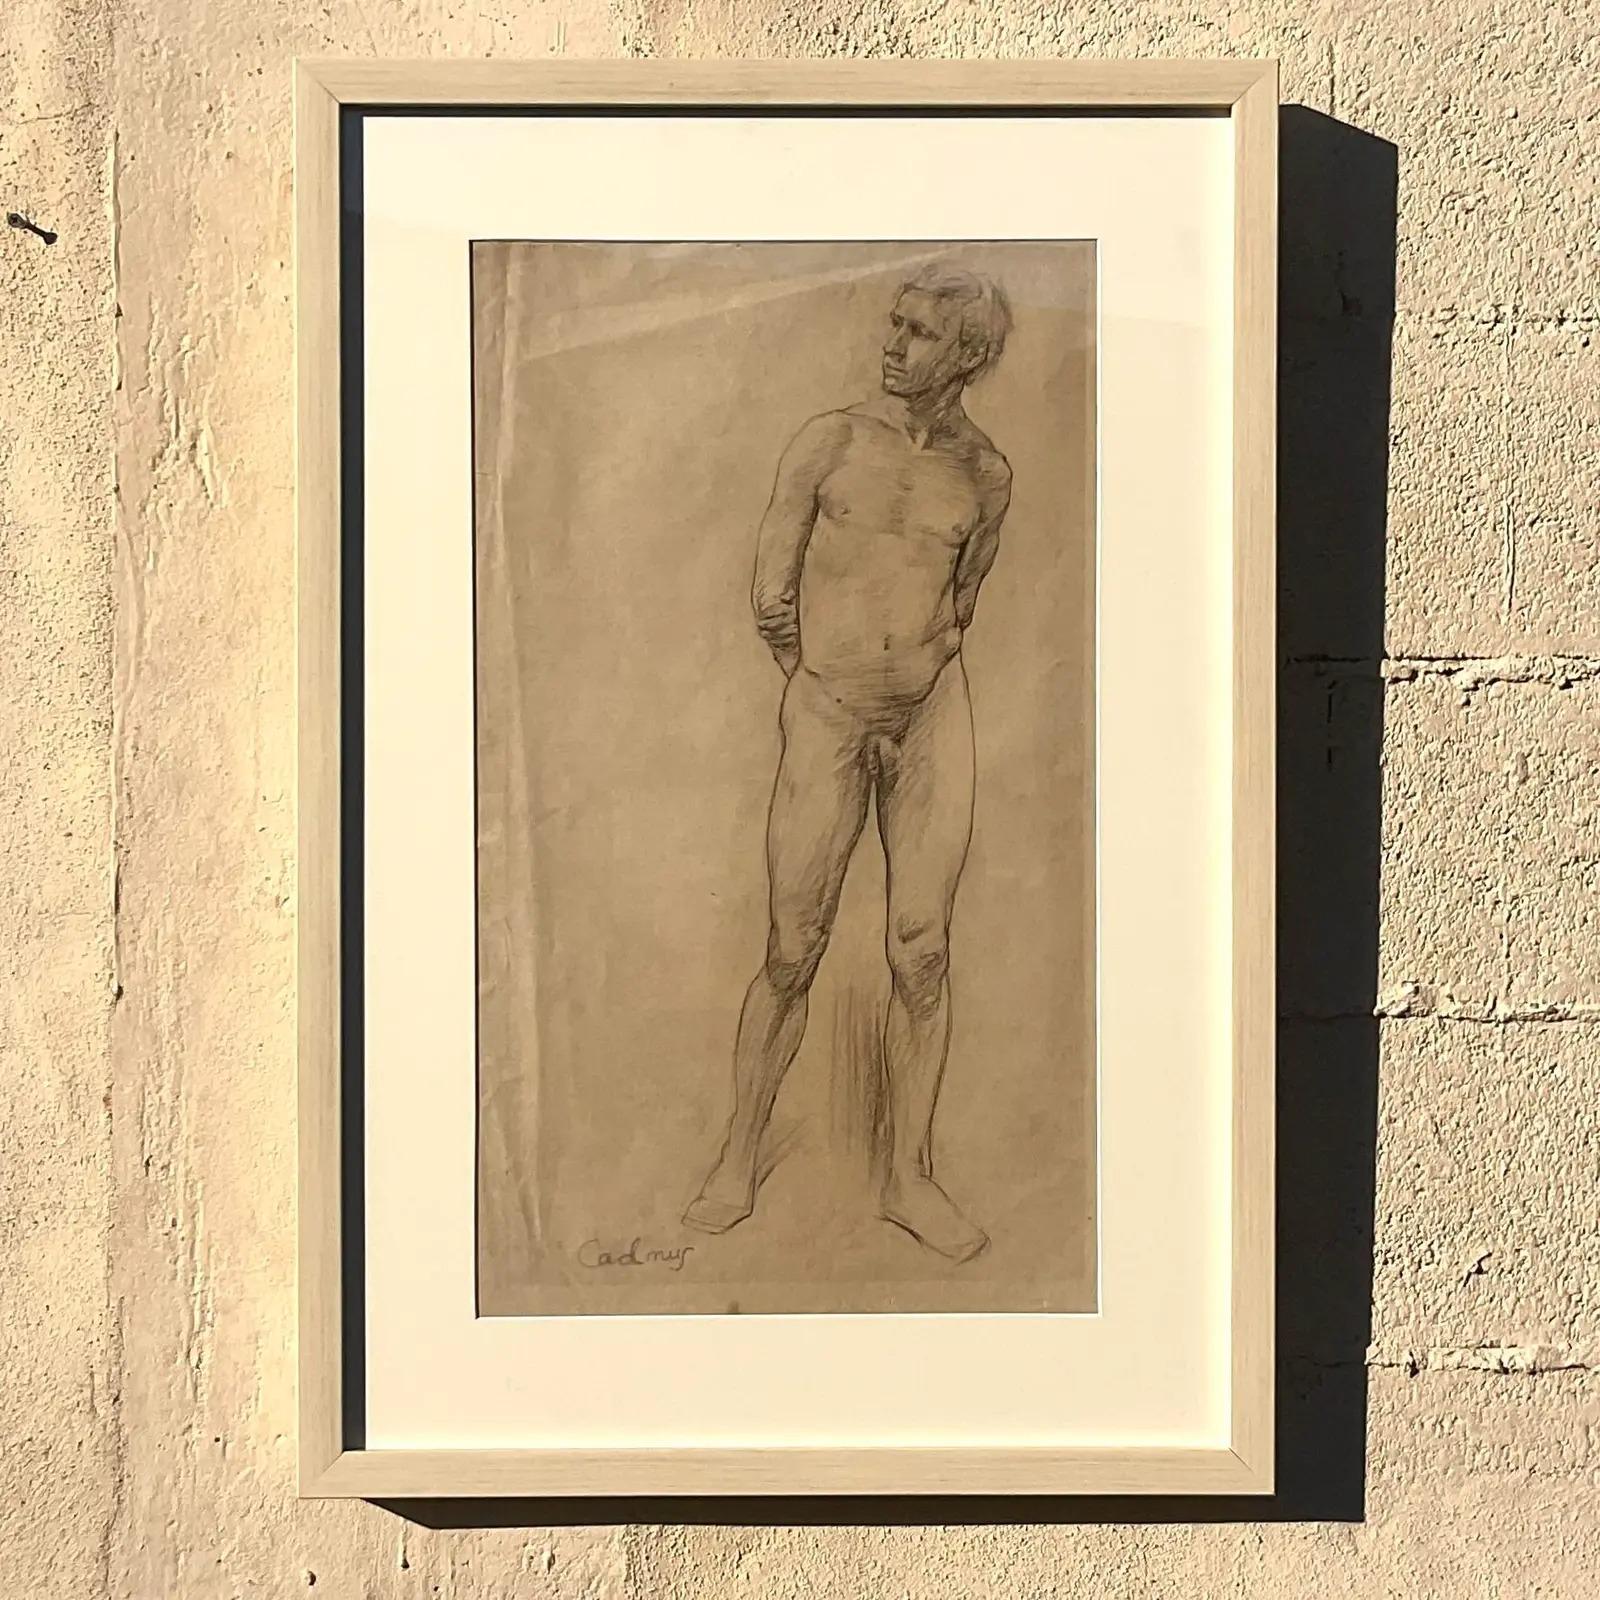 Vintage Boho Original Sketch of Nude Male Signed Cadmus In Good Condition For Sale In west palm beach, FL